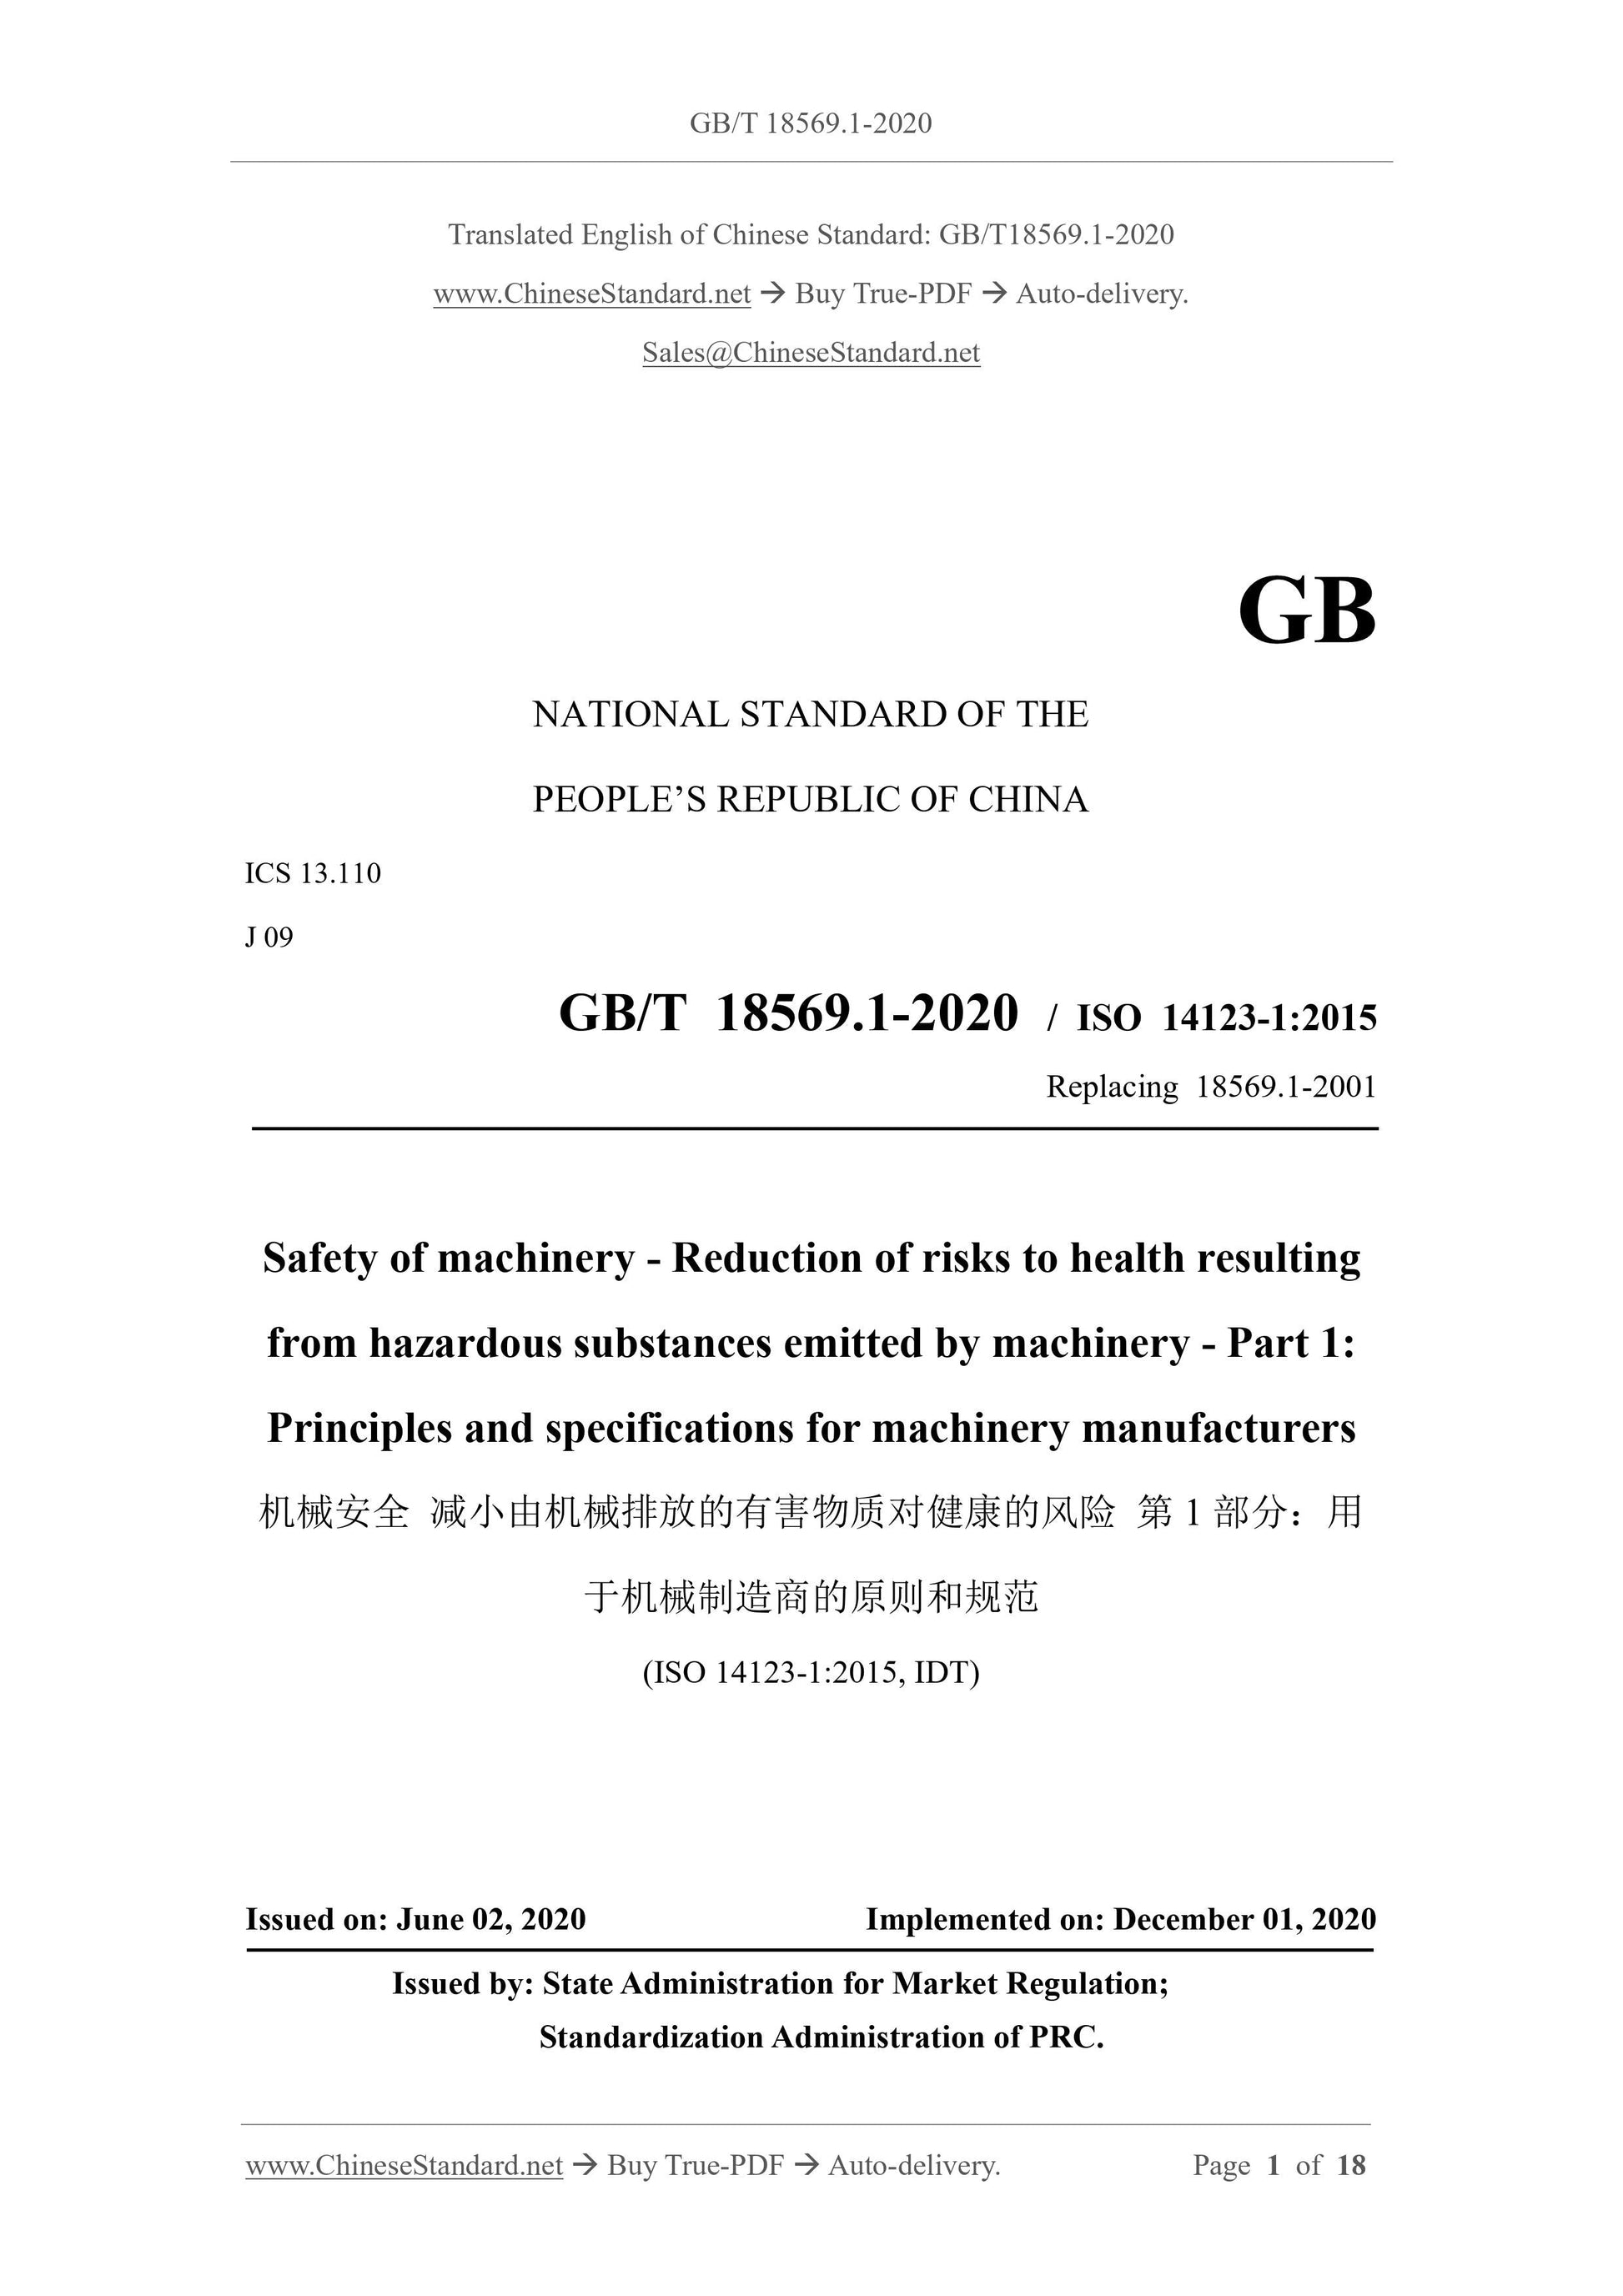 GB/T 18569.1-2020 Page 1